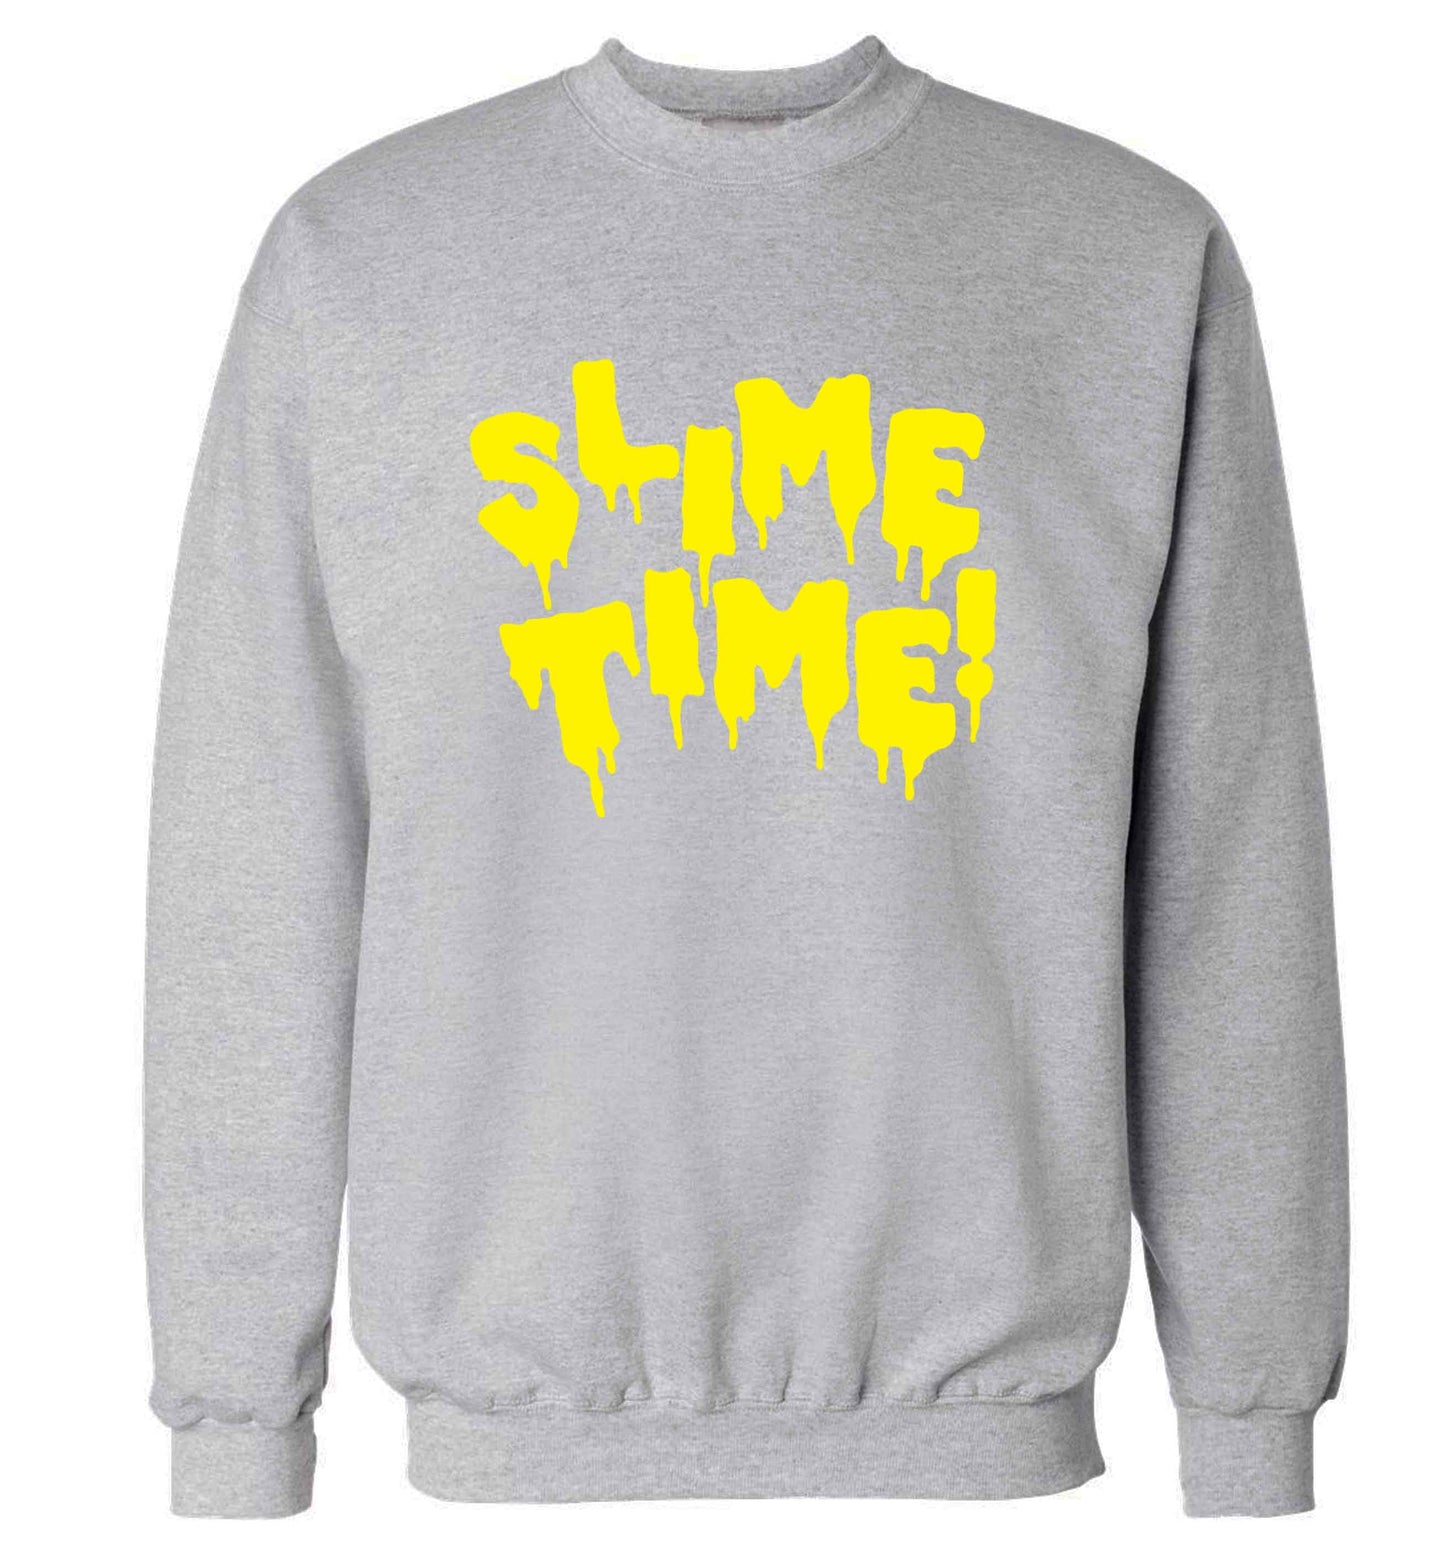 Neon yellow slime time adult's unisex grey sweater 2XL